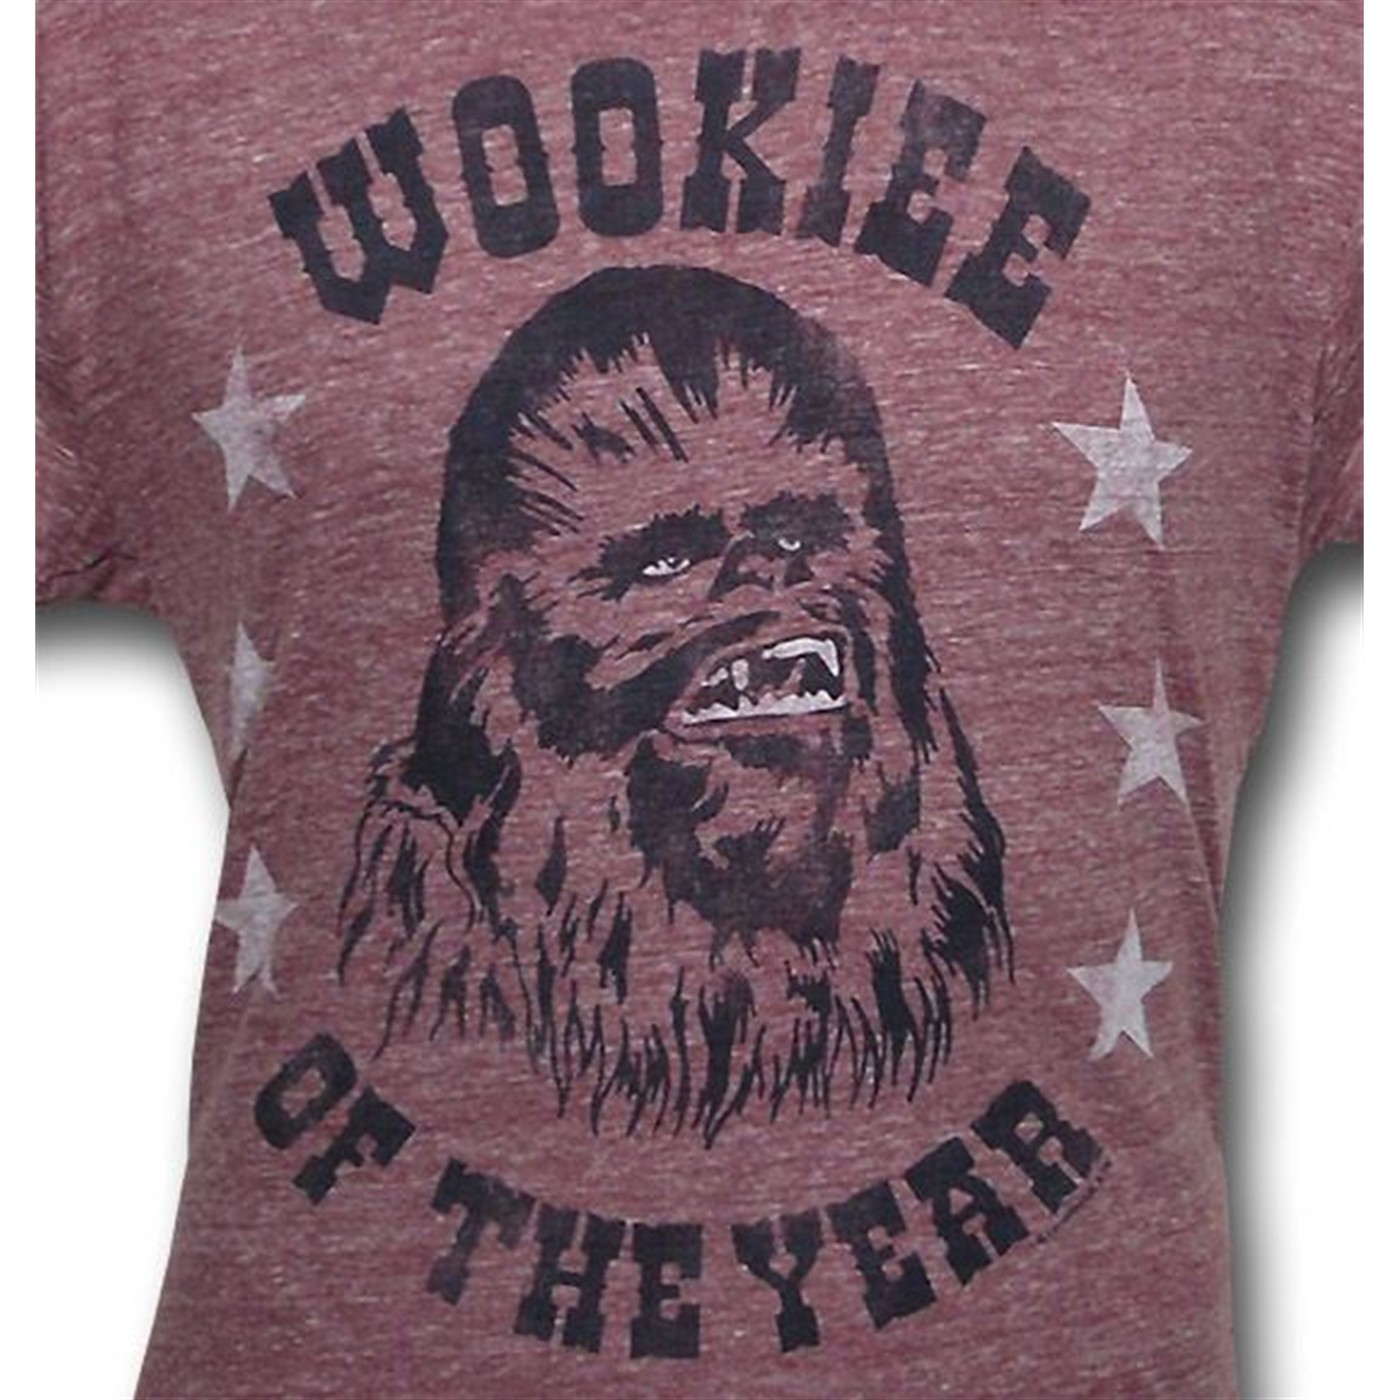 Chewbacca Wookiee of the Year Junk Food T-Shirt